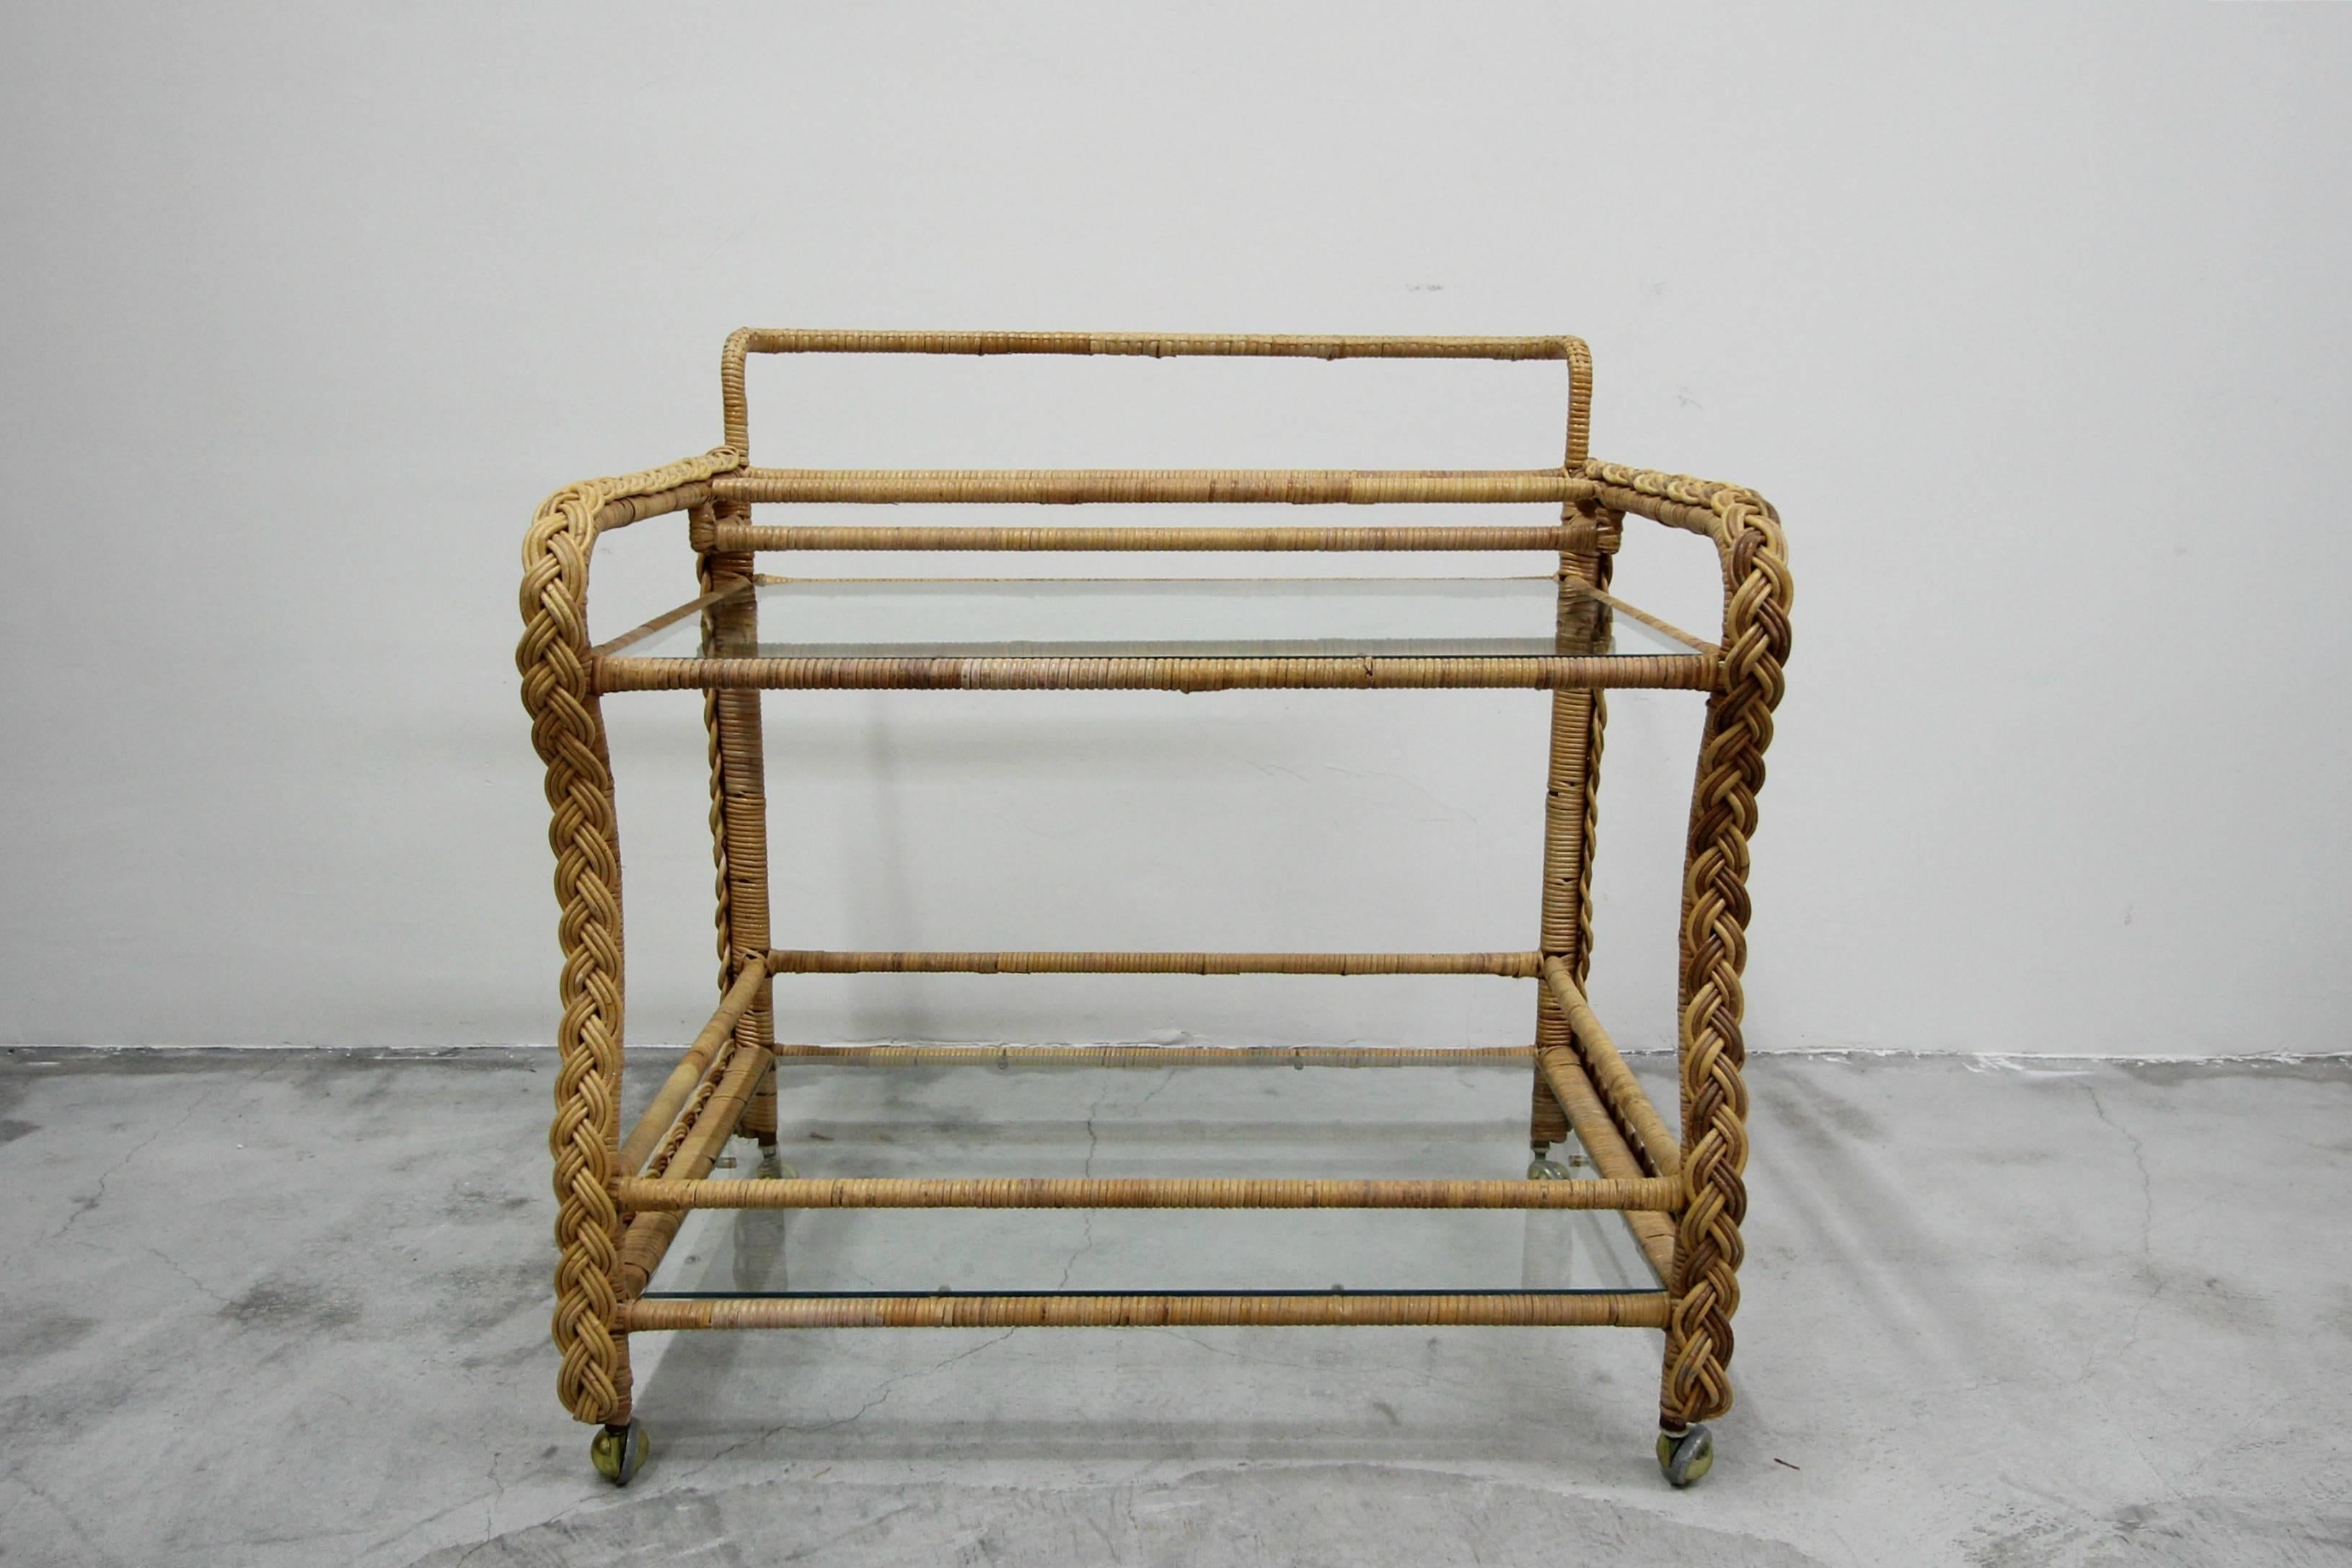 Simple, clean, two-tier, braided wicker bar cart. Features two glass shelves. Brass casters for easy movement.

Perfect in small spaces, great for a sun room, easy to roll outside by the pool for your summer shindig.

Excellent condition, no